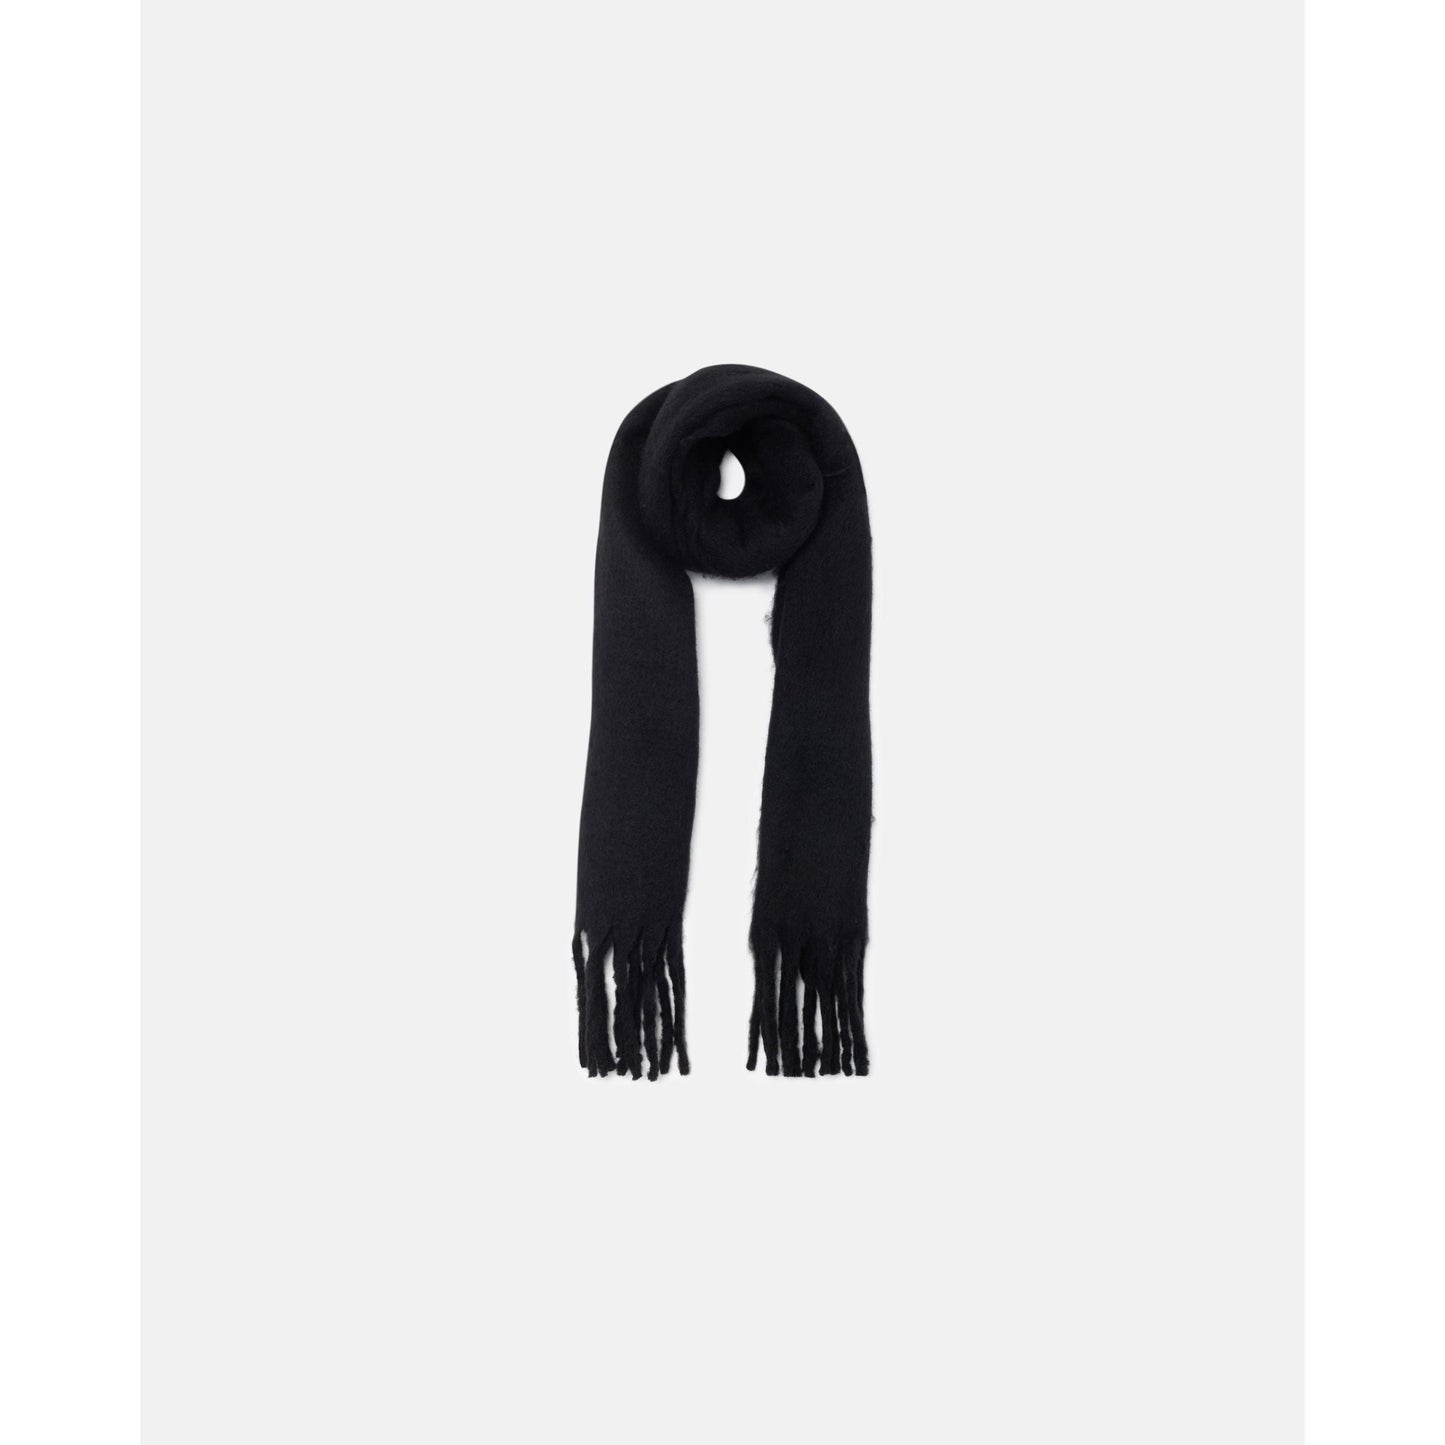 Compania Fantastica - Black knitted scarf with fringes